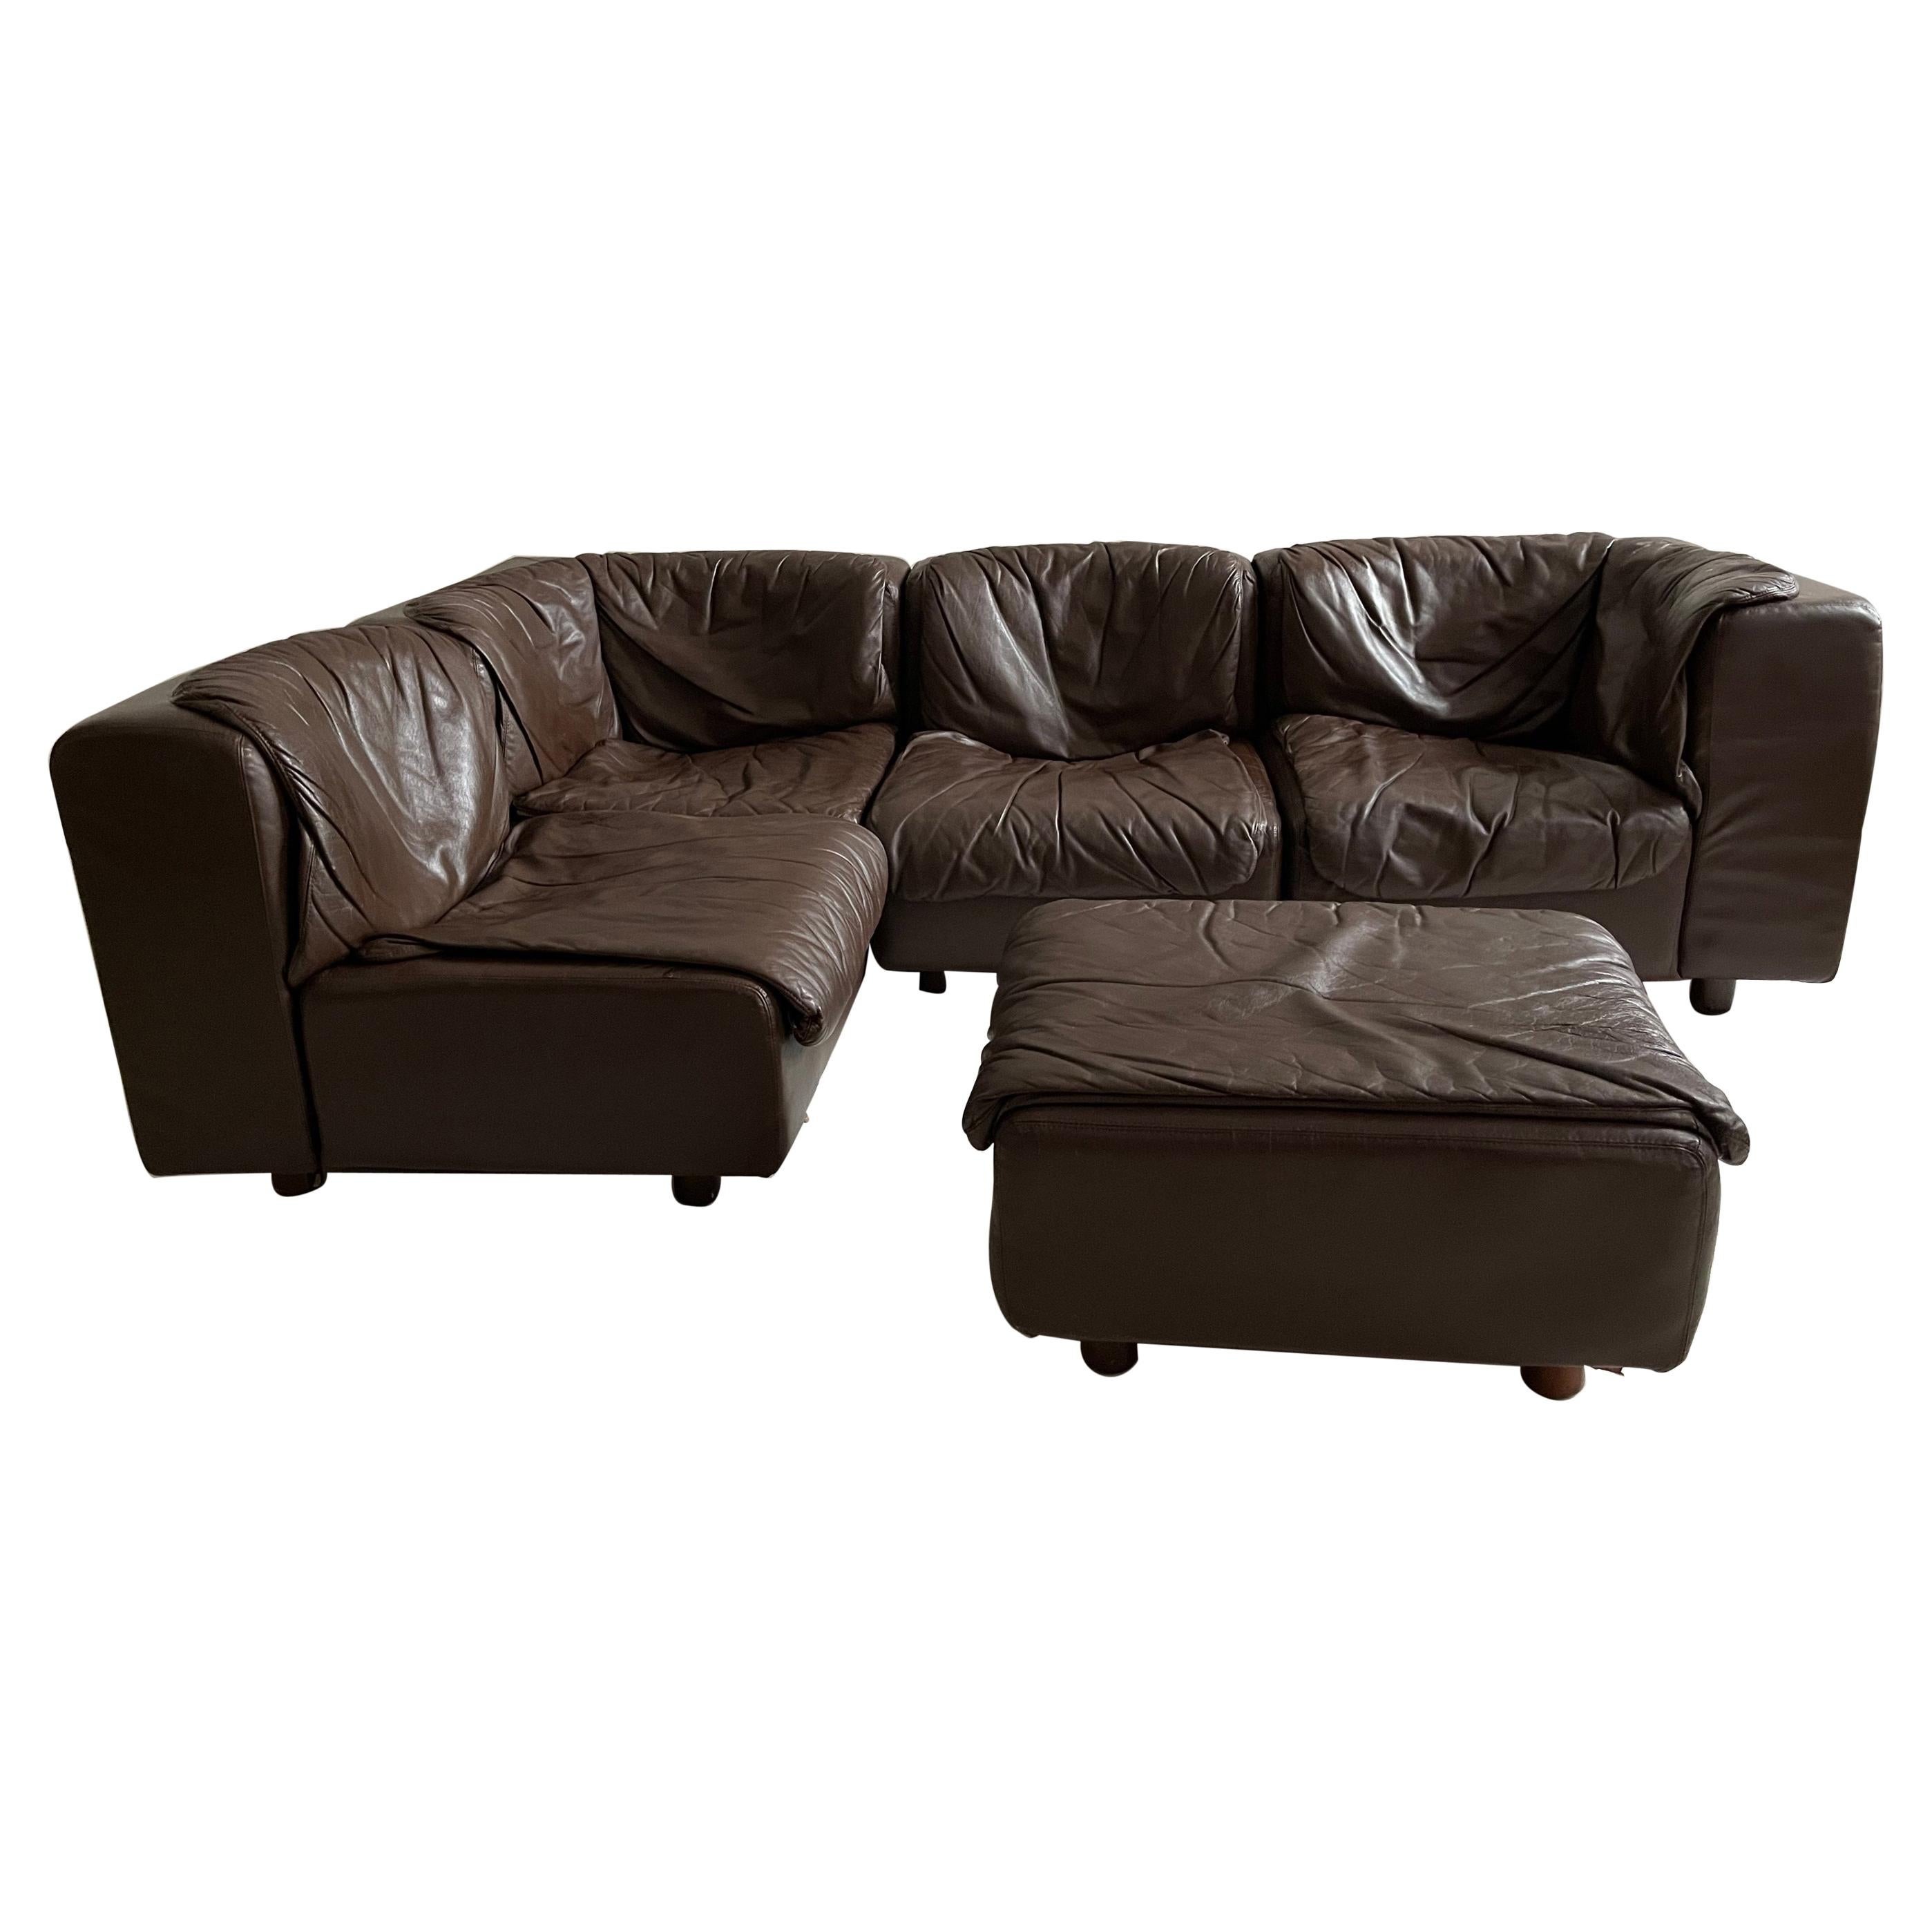 Tito Agnoli Attributed Modular, Soft Leather Sectional